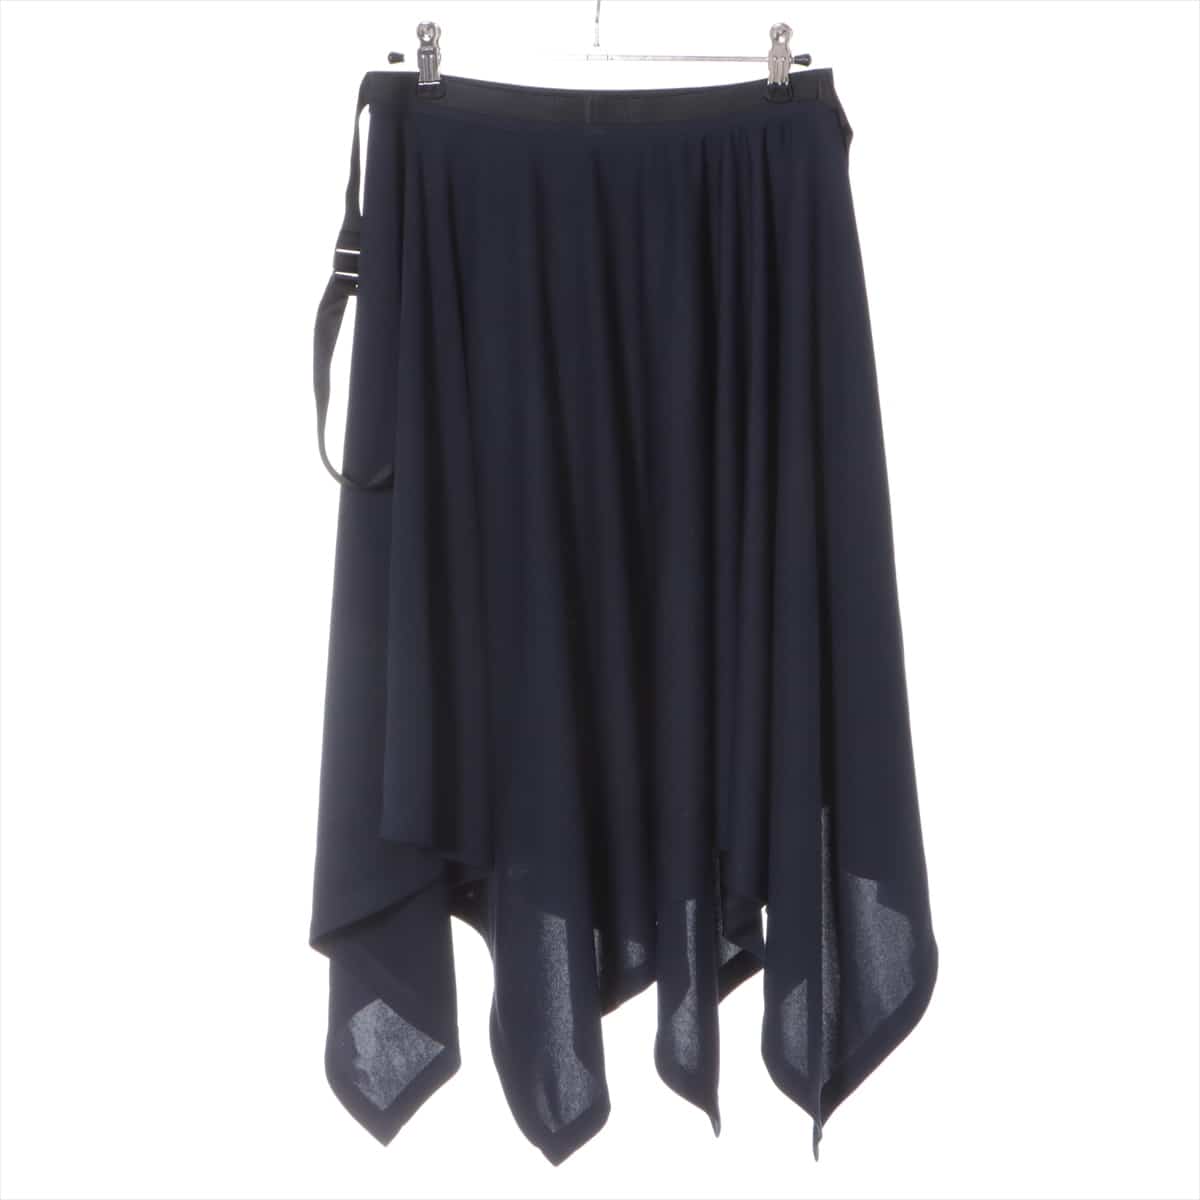 ISSEY MIYAKE Polyester Skirt 3 Ladies' Navy blue  IL81JG733 triangle flare